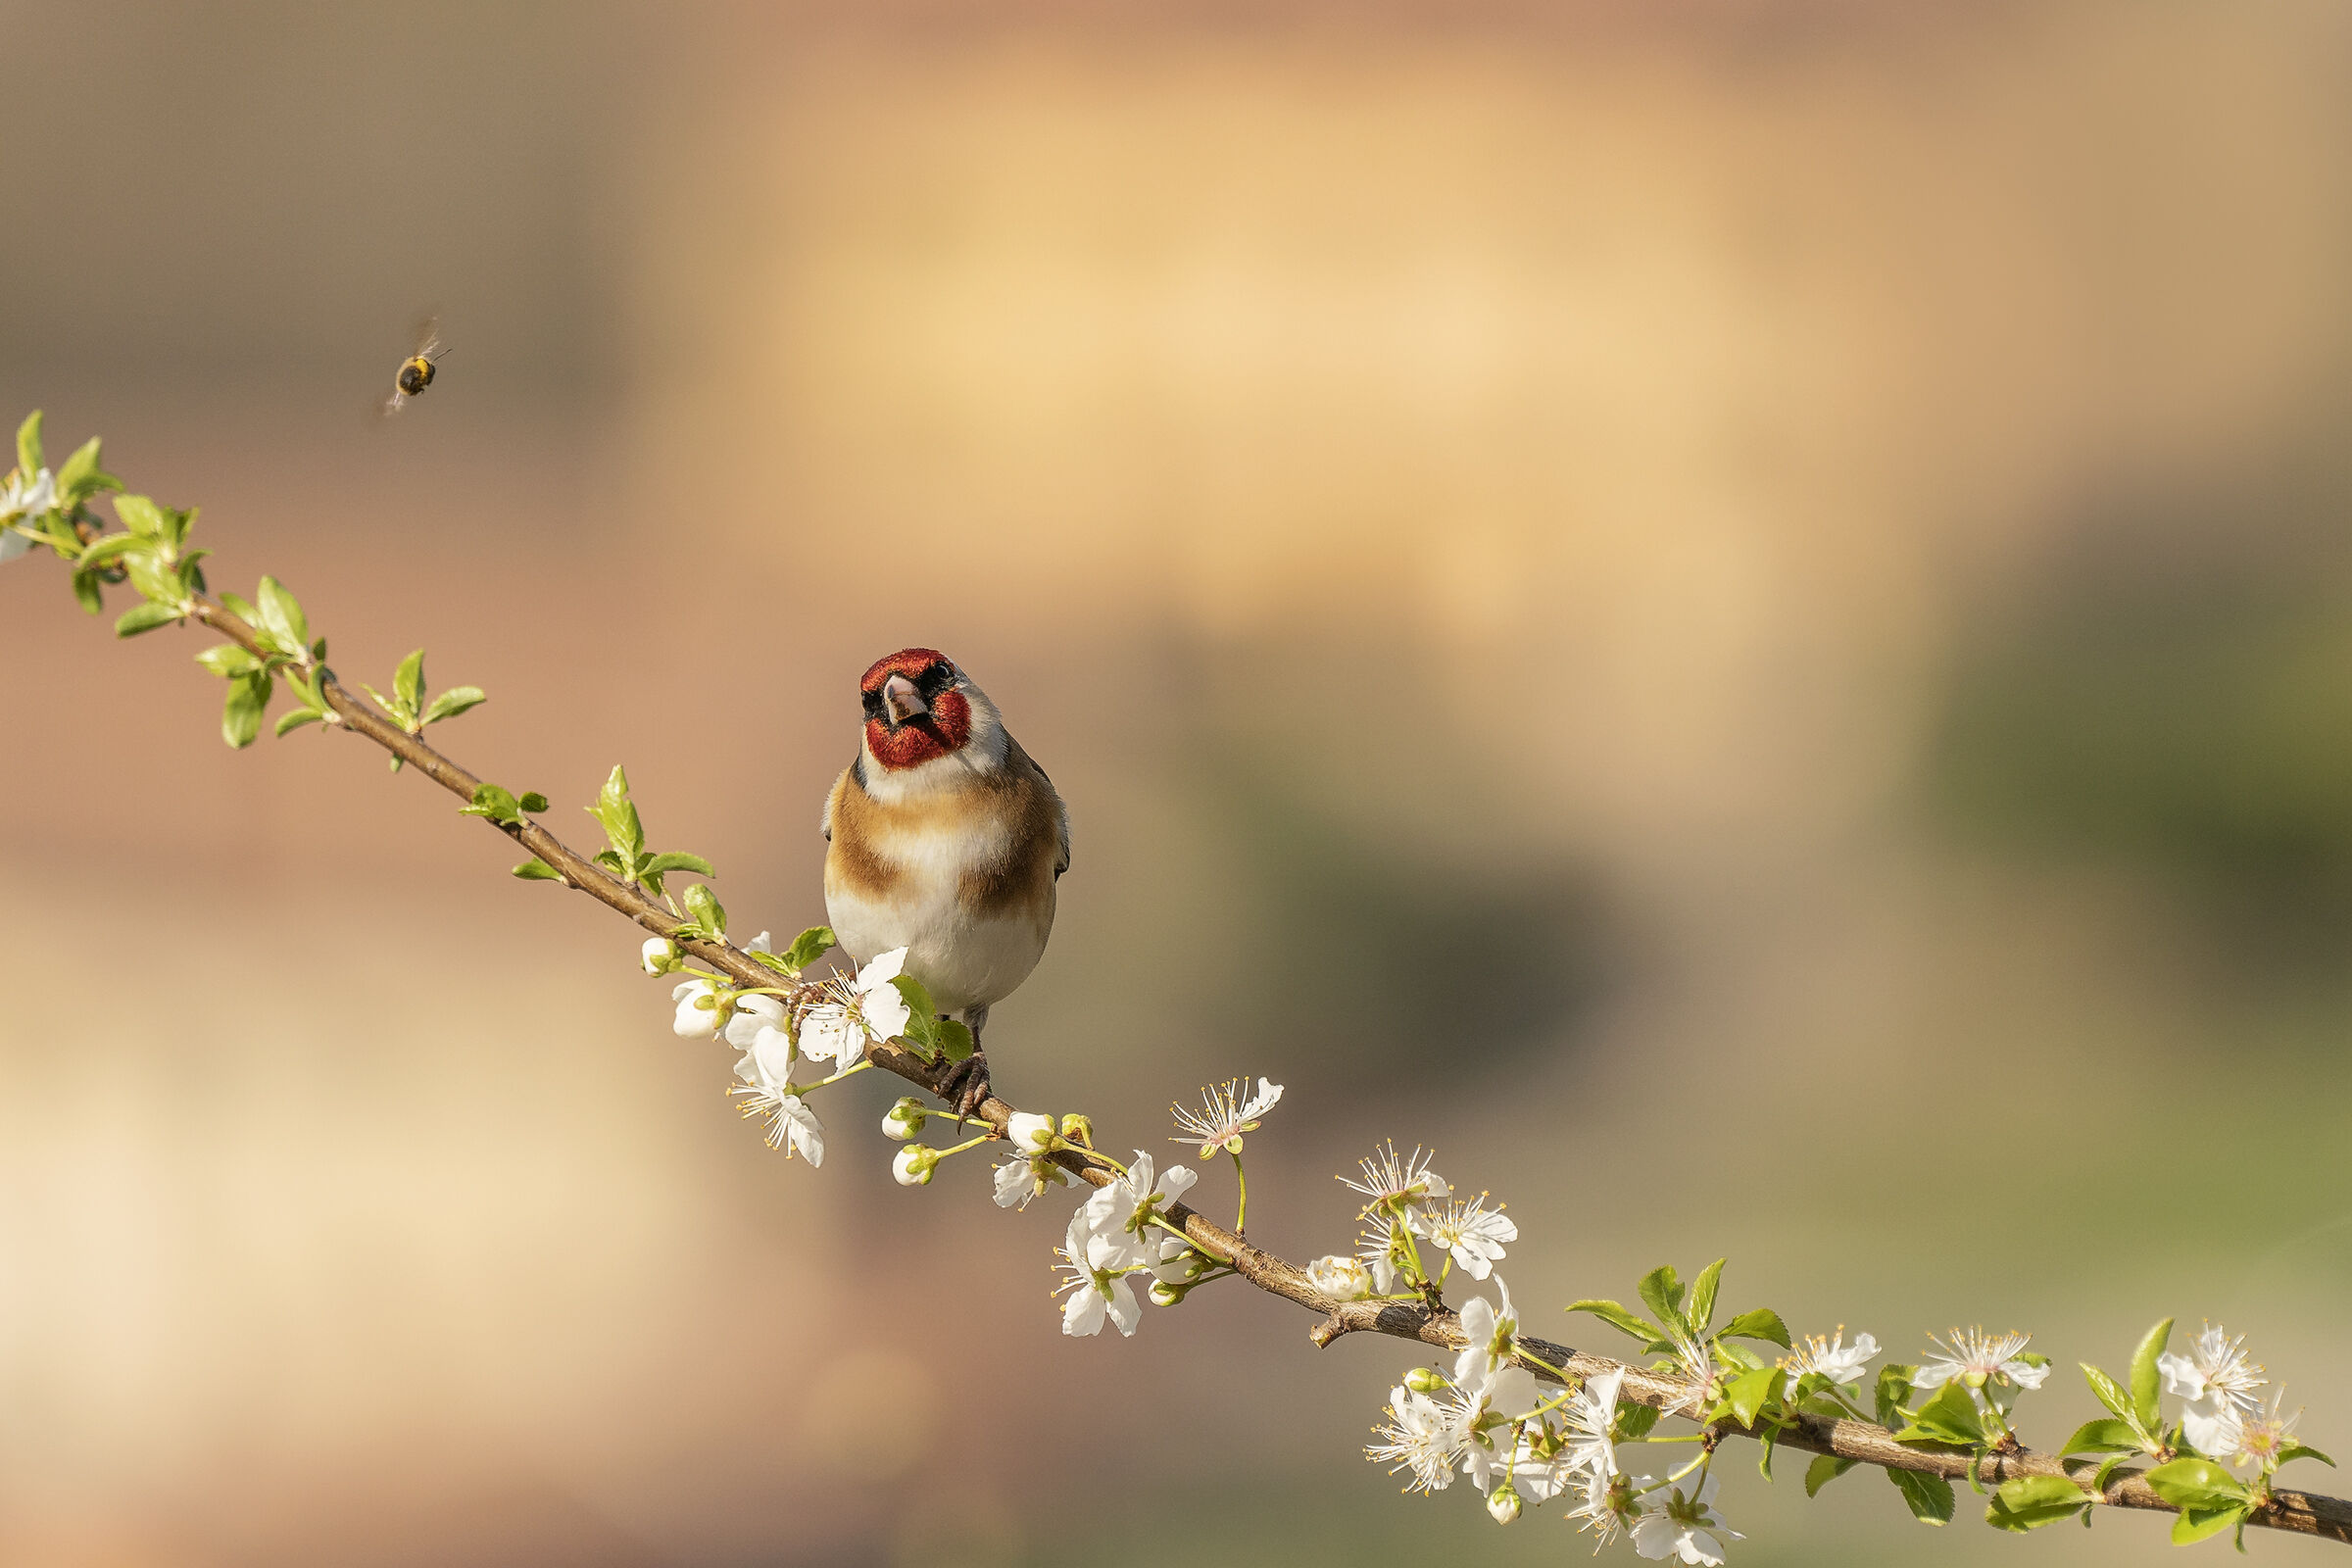 The Goldfinch and the Bee...